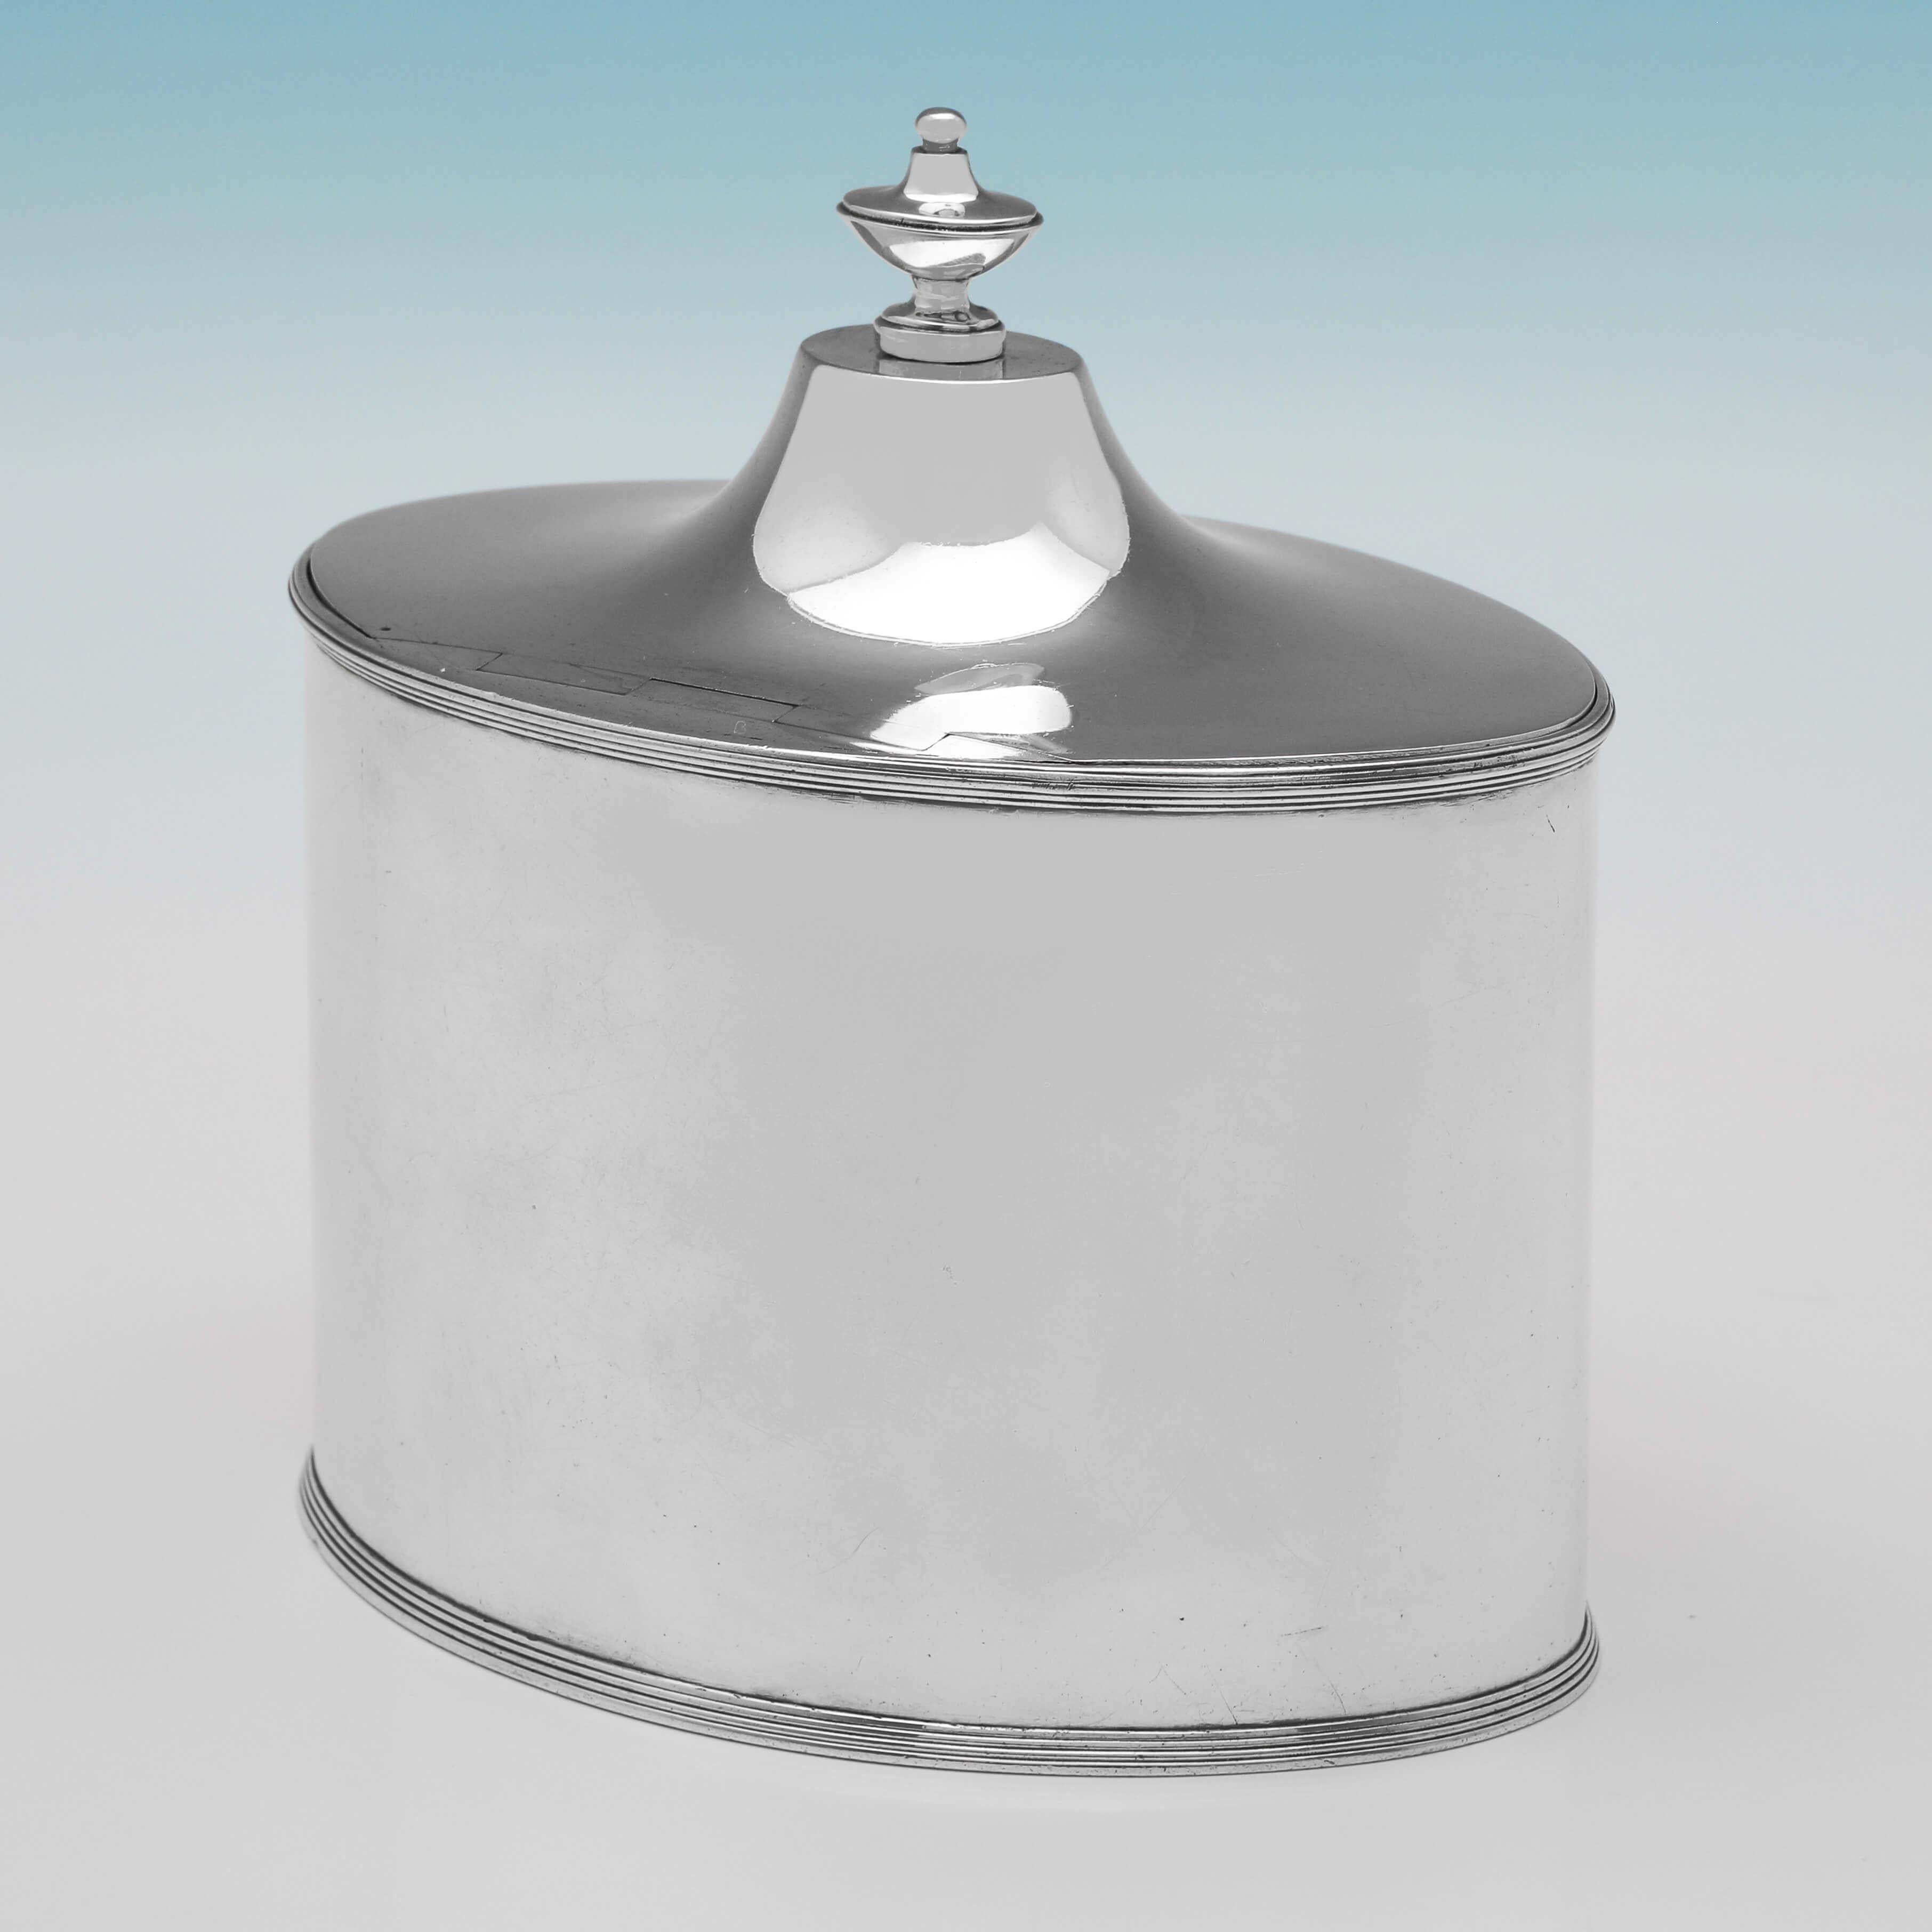 Hallmarked in London in 1792 by John Scofield, this very handsome, George III, Antique Sterling Silver Tea Caddy, is oval in shape, plain in style, and features reed detailing. The tea caddy measures 5.75